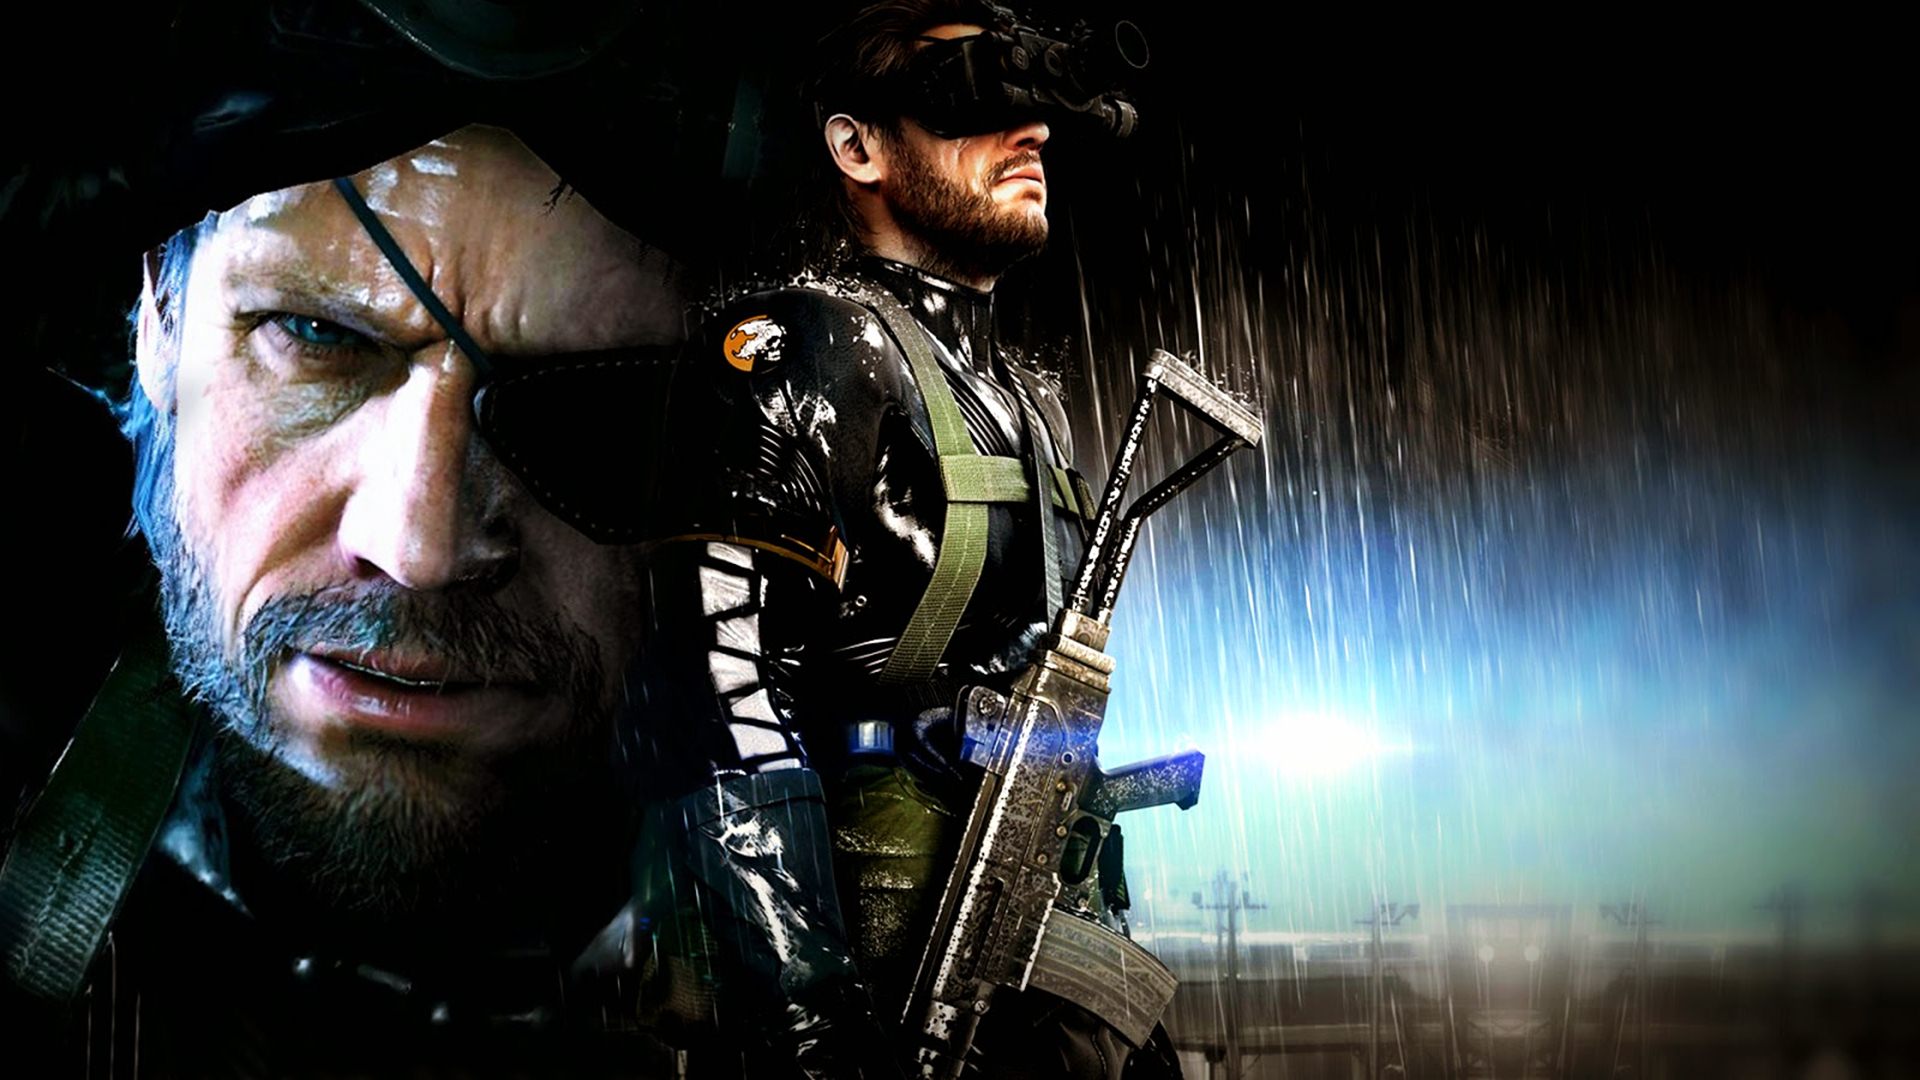 mgs 5 tapete,film,fotografie,actionfilm,spiele